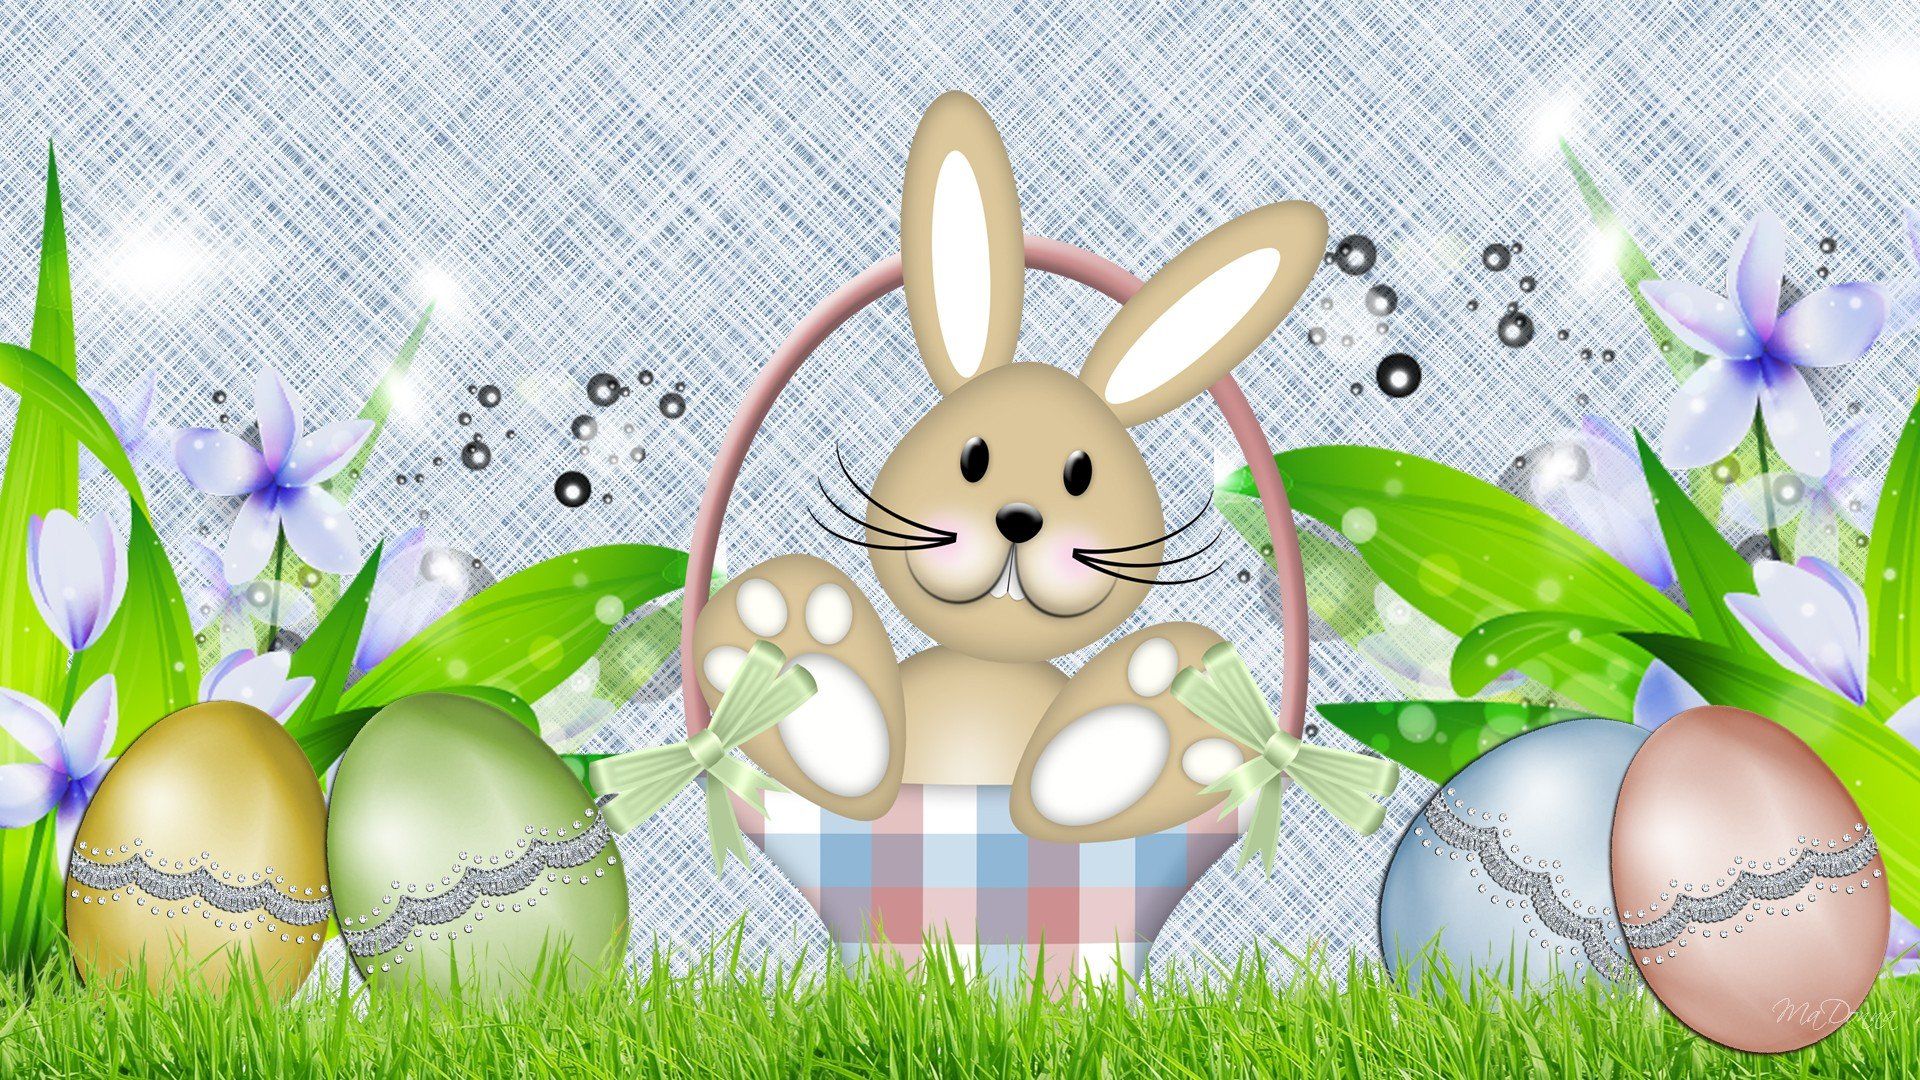 Free download picture happy easter bunny picture background wallpaper Car Picture [1920x1080] for your Desktop, Mobile & Tablet. Explore Easter Bunny Wallpaper Background. Free Bunny Wallpaper, Easter Wallpaper HD